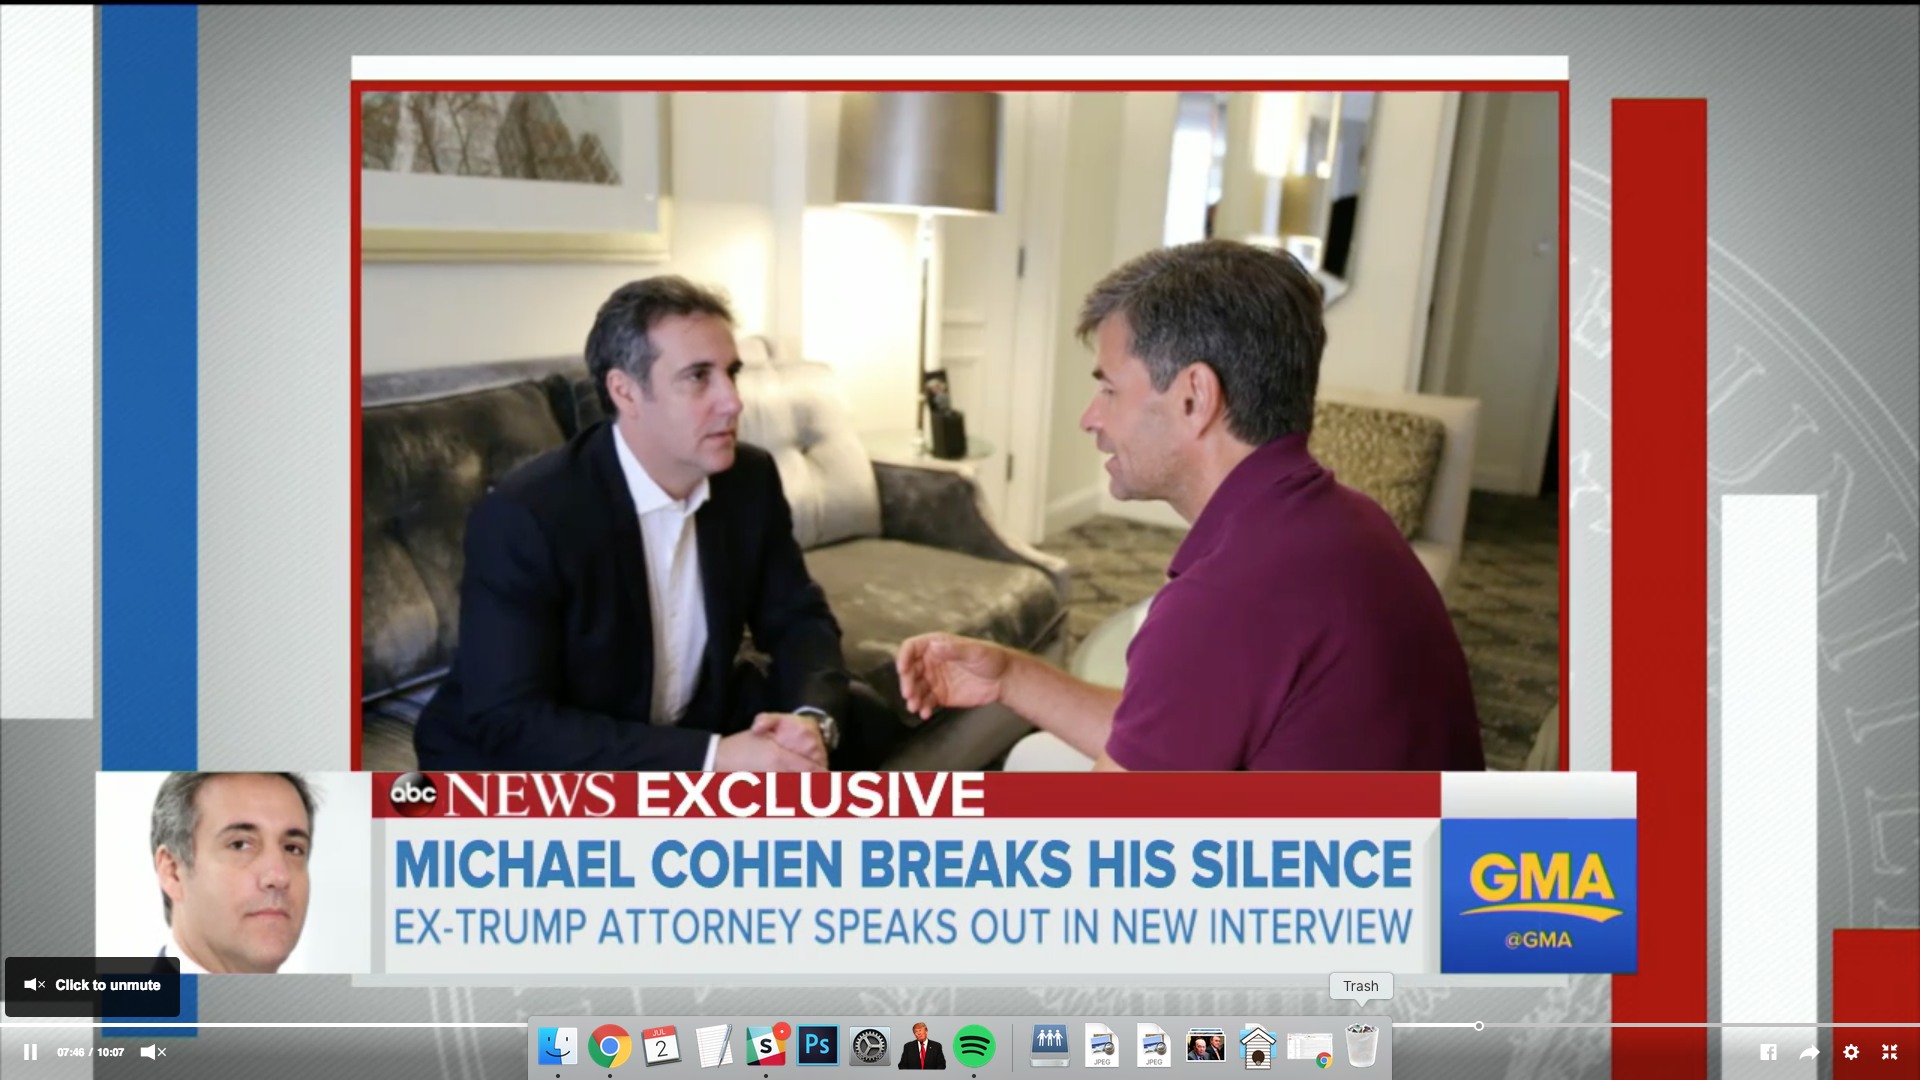 Michael Cohen and George Stephanopoulos.